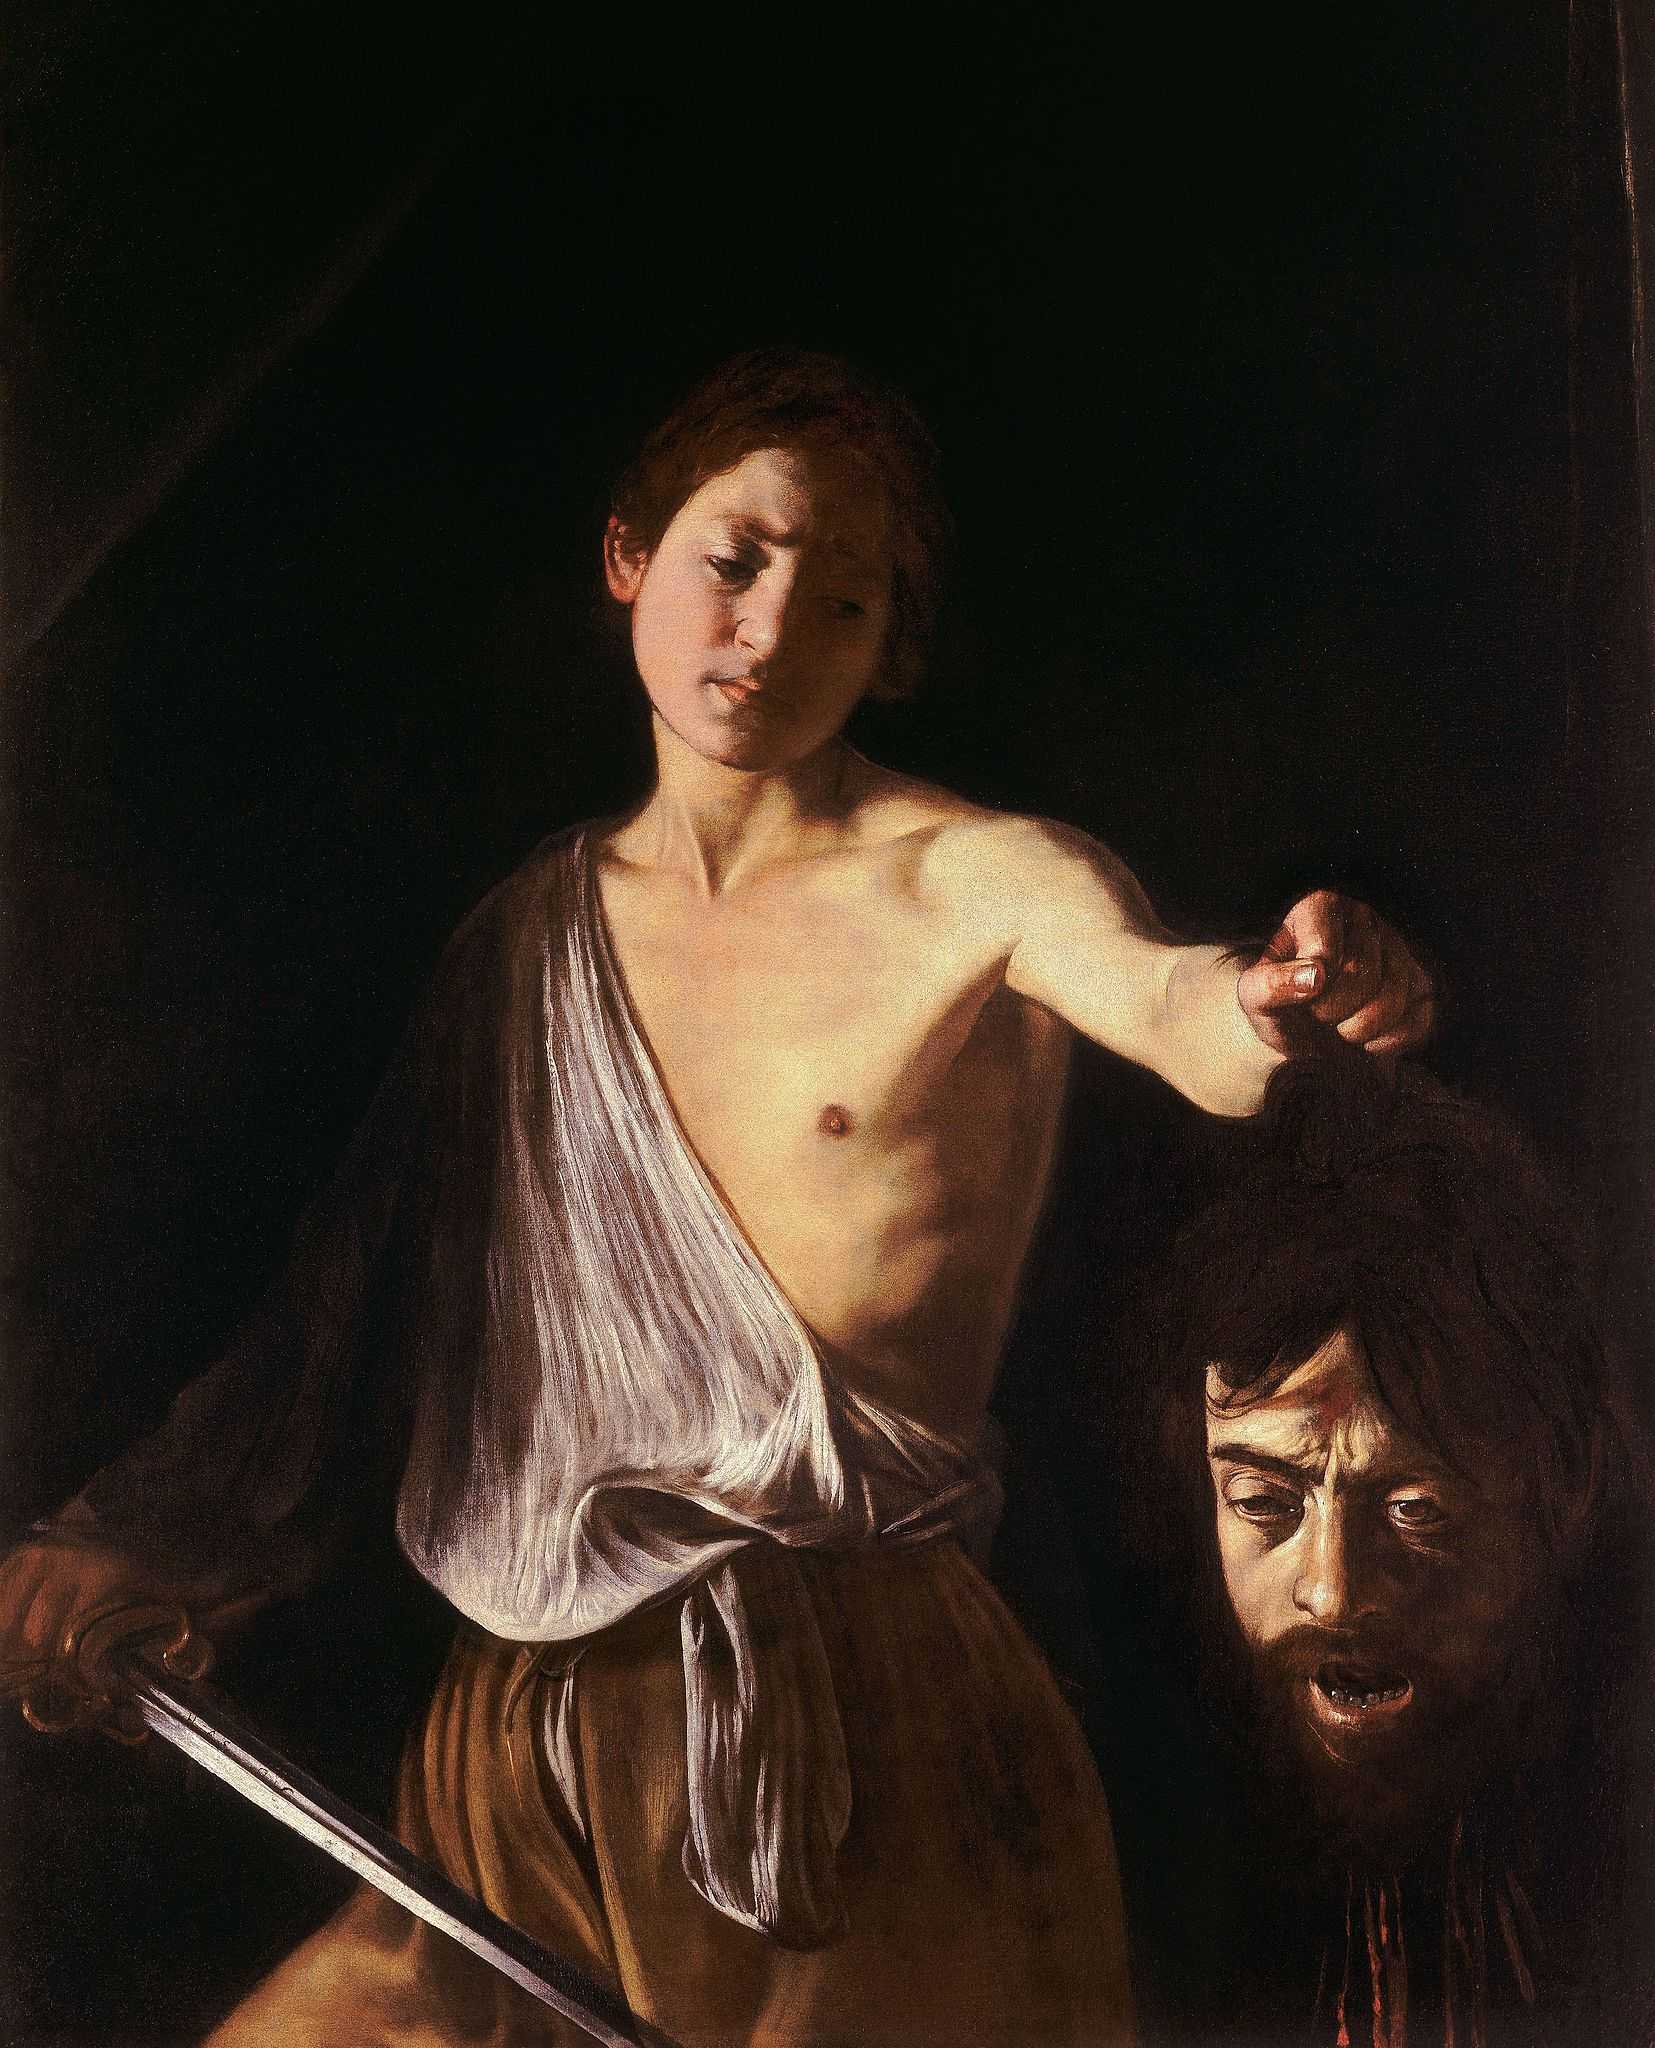 Find out more about Caravaggio - David with the Head of Goliath